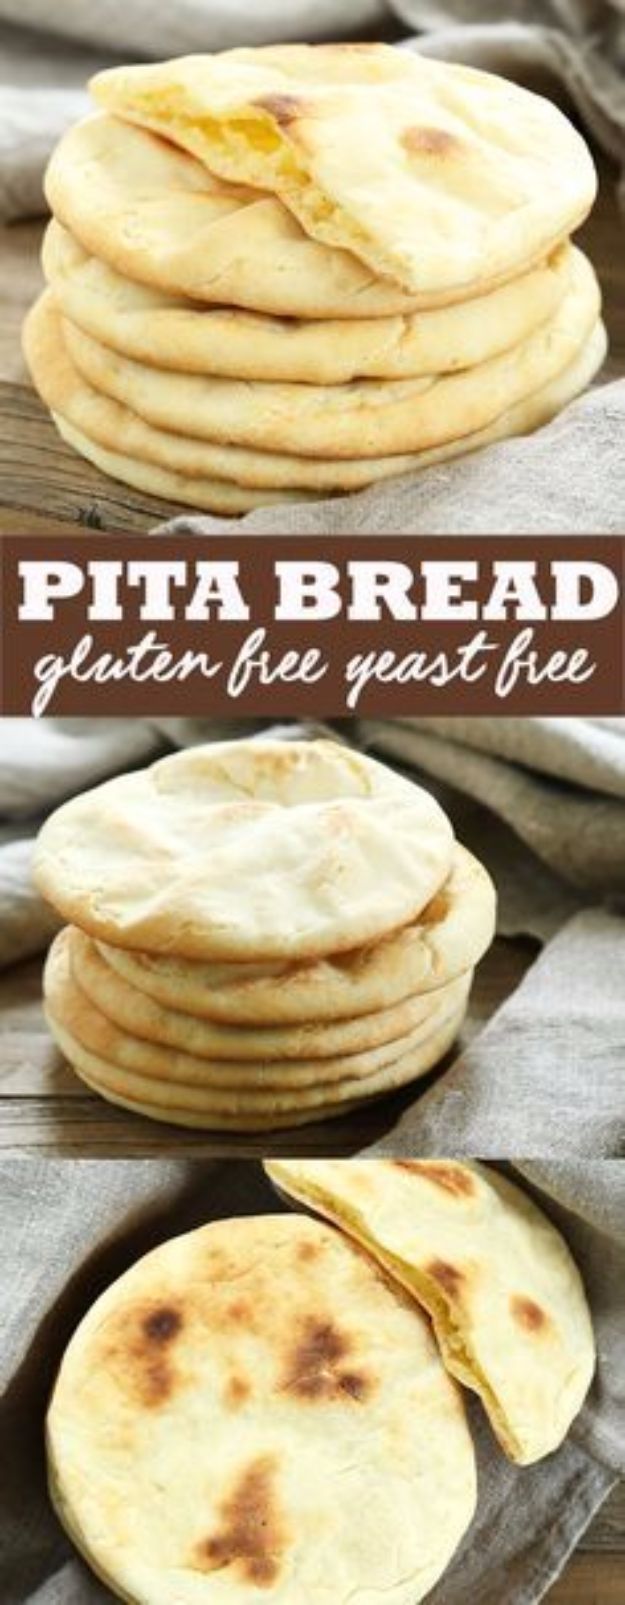 Gluten Free Recipes - Gluten Free Pita Bread - Easy Vegetarian or Vegan Recipes For Dinner and For Dessert - How To Make Healthy Glutenfree Bread and Appetizers For Kids - Fun Crockpot Recipes For Breakfast While On A Budget http://diyjoy.com/gluten-free-recipes